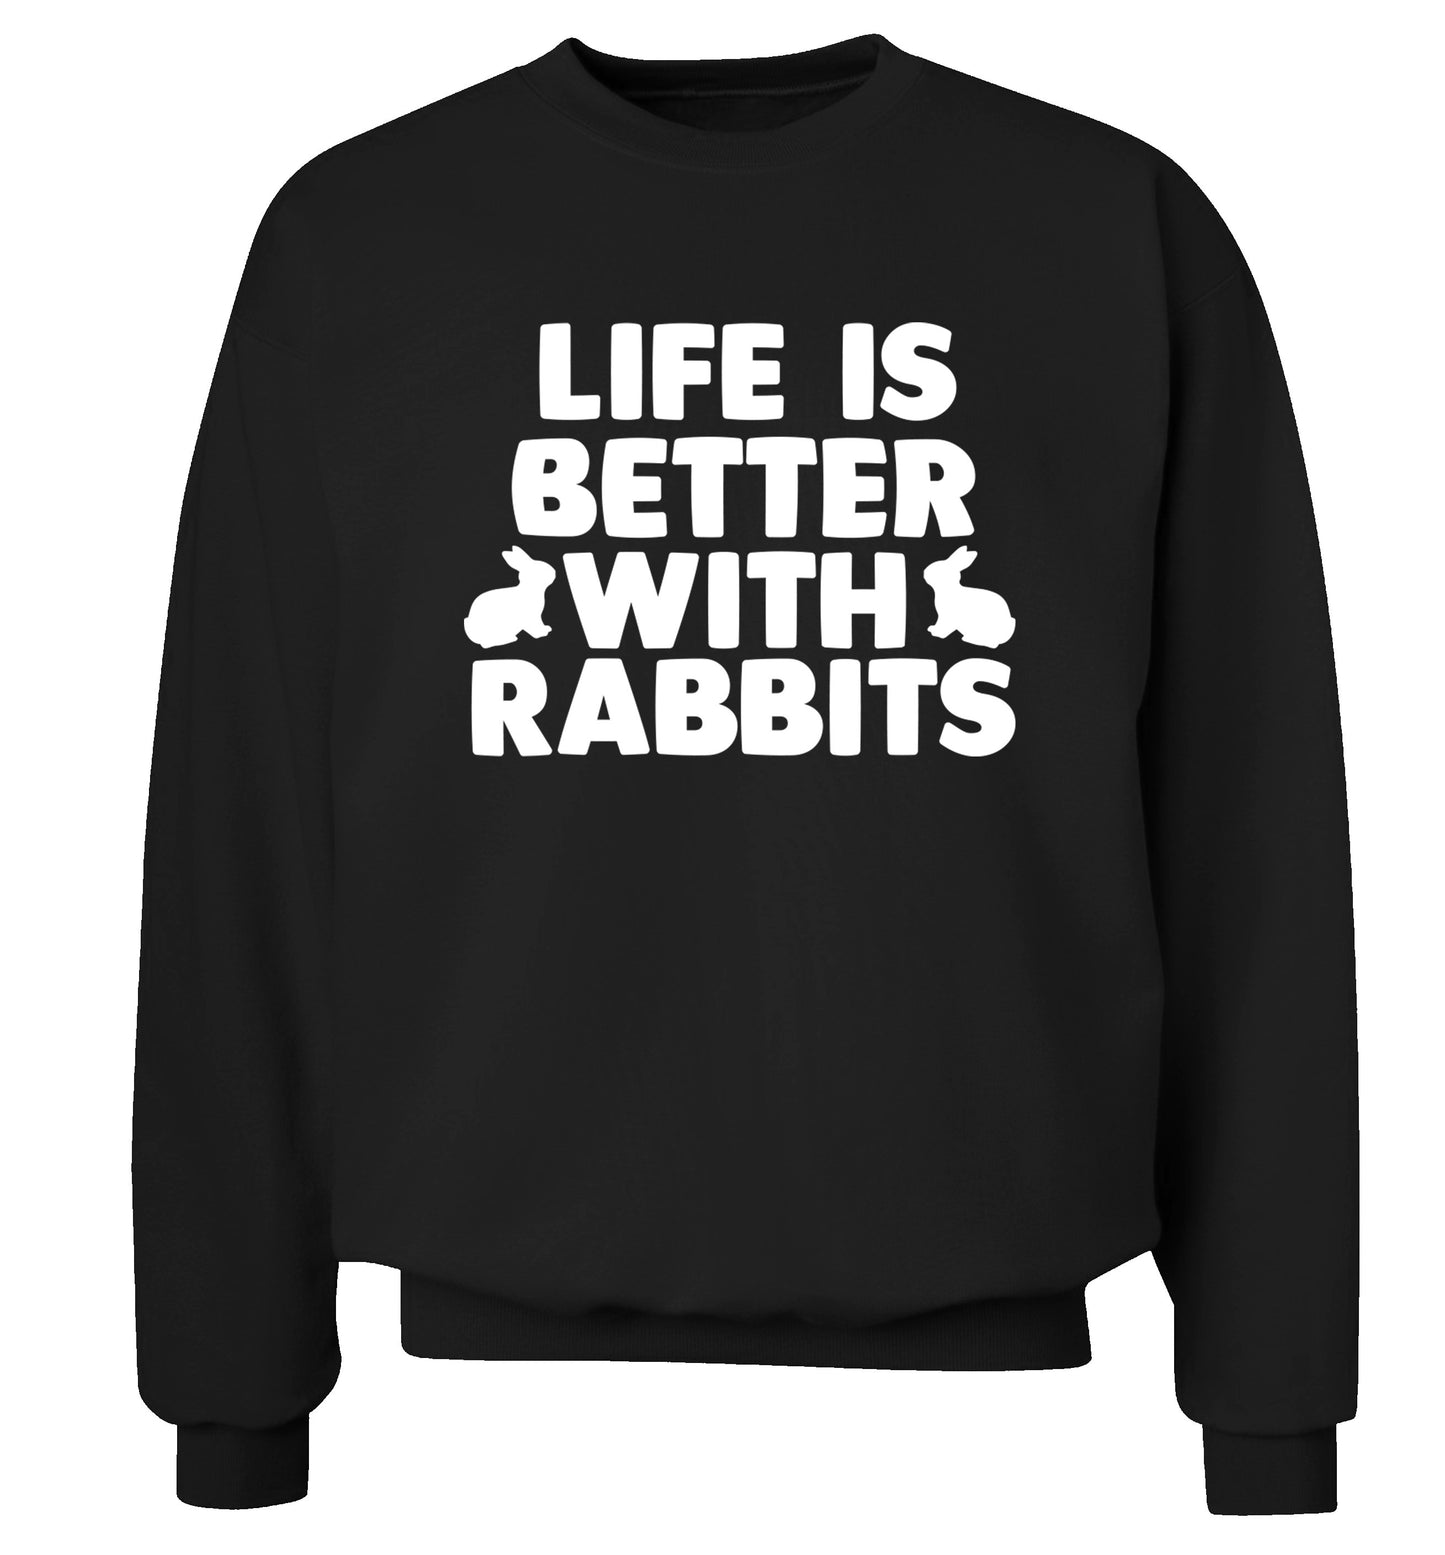 Life is better with rabbits Adult's unisex black  sweater 2XL